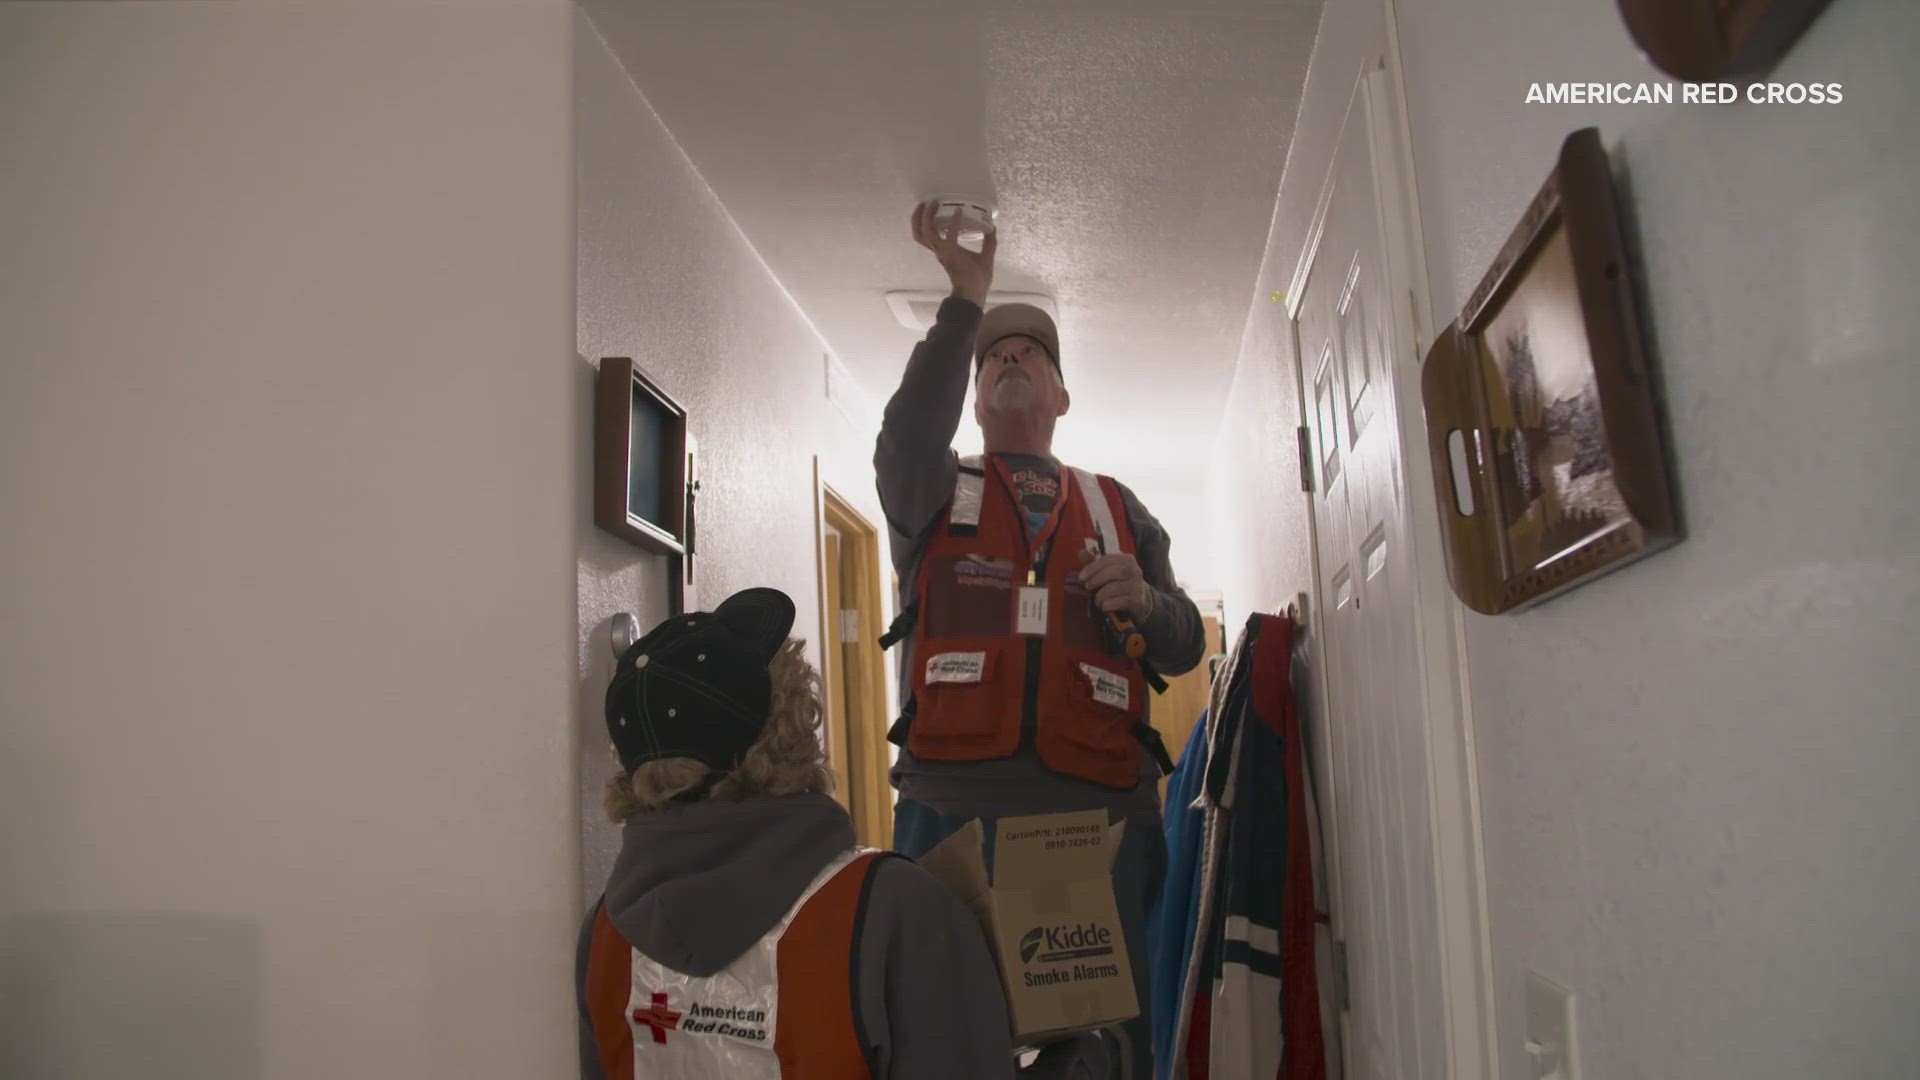 Now that we've turned out clocks ahead one hour, it's an important reminder to check that we have working smoke alarms.